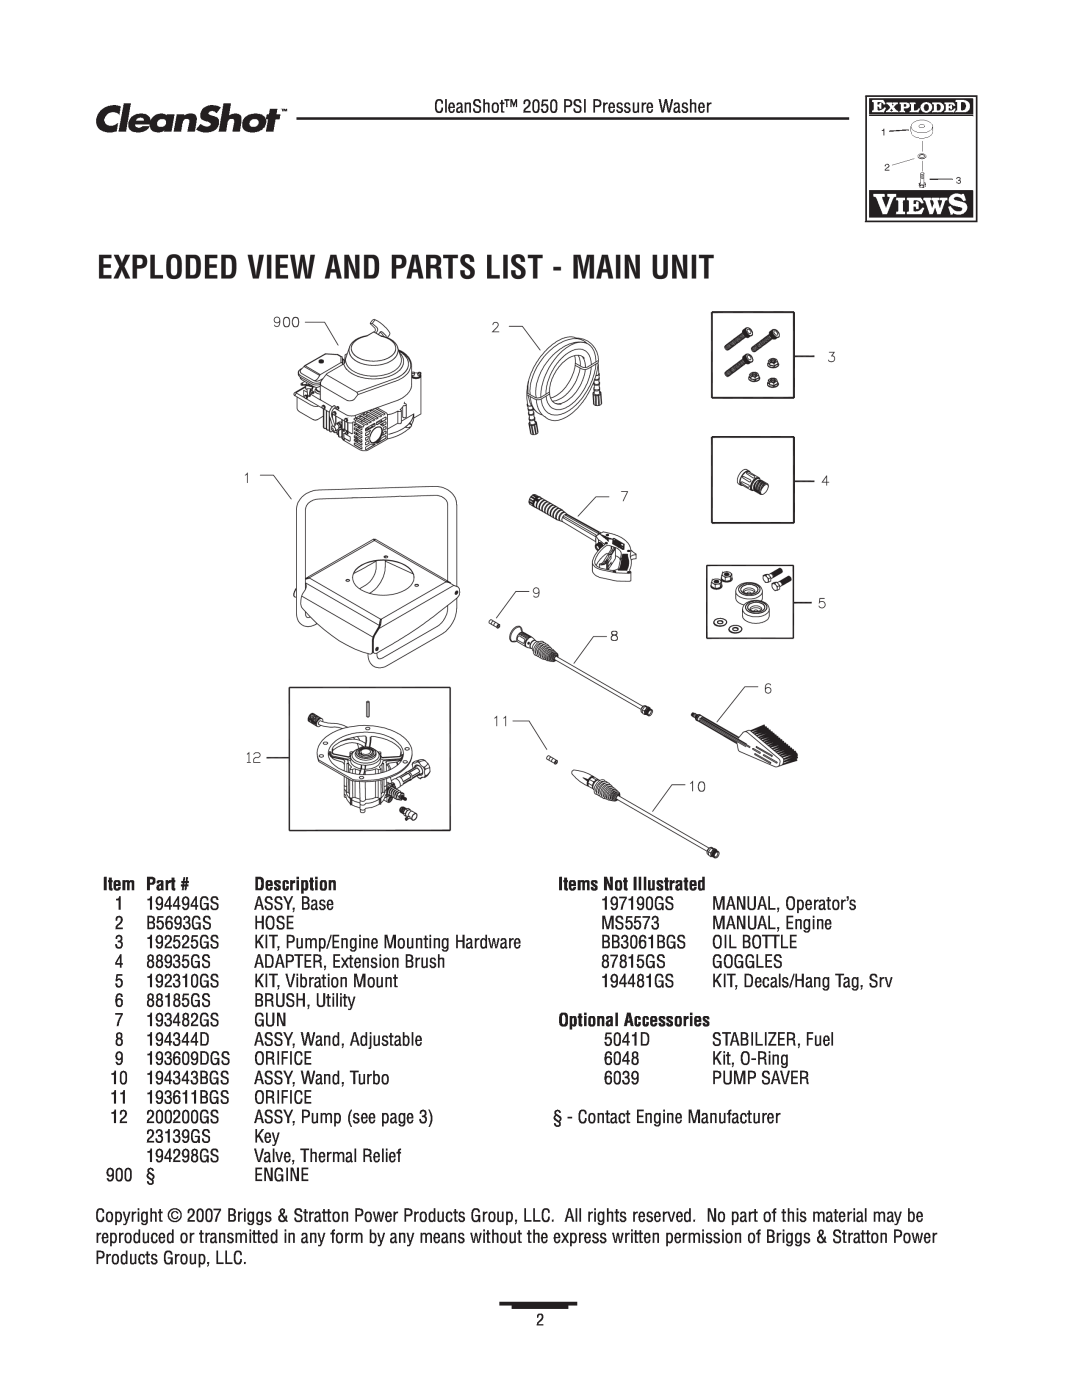 Briggs & Stratton 020206-02 manual Exploded View And Parts List - Main Unit, Description 